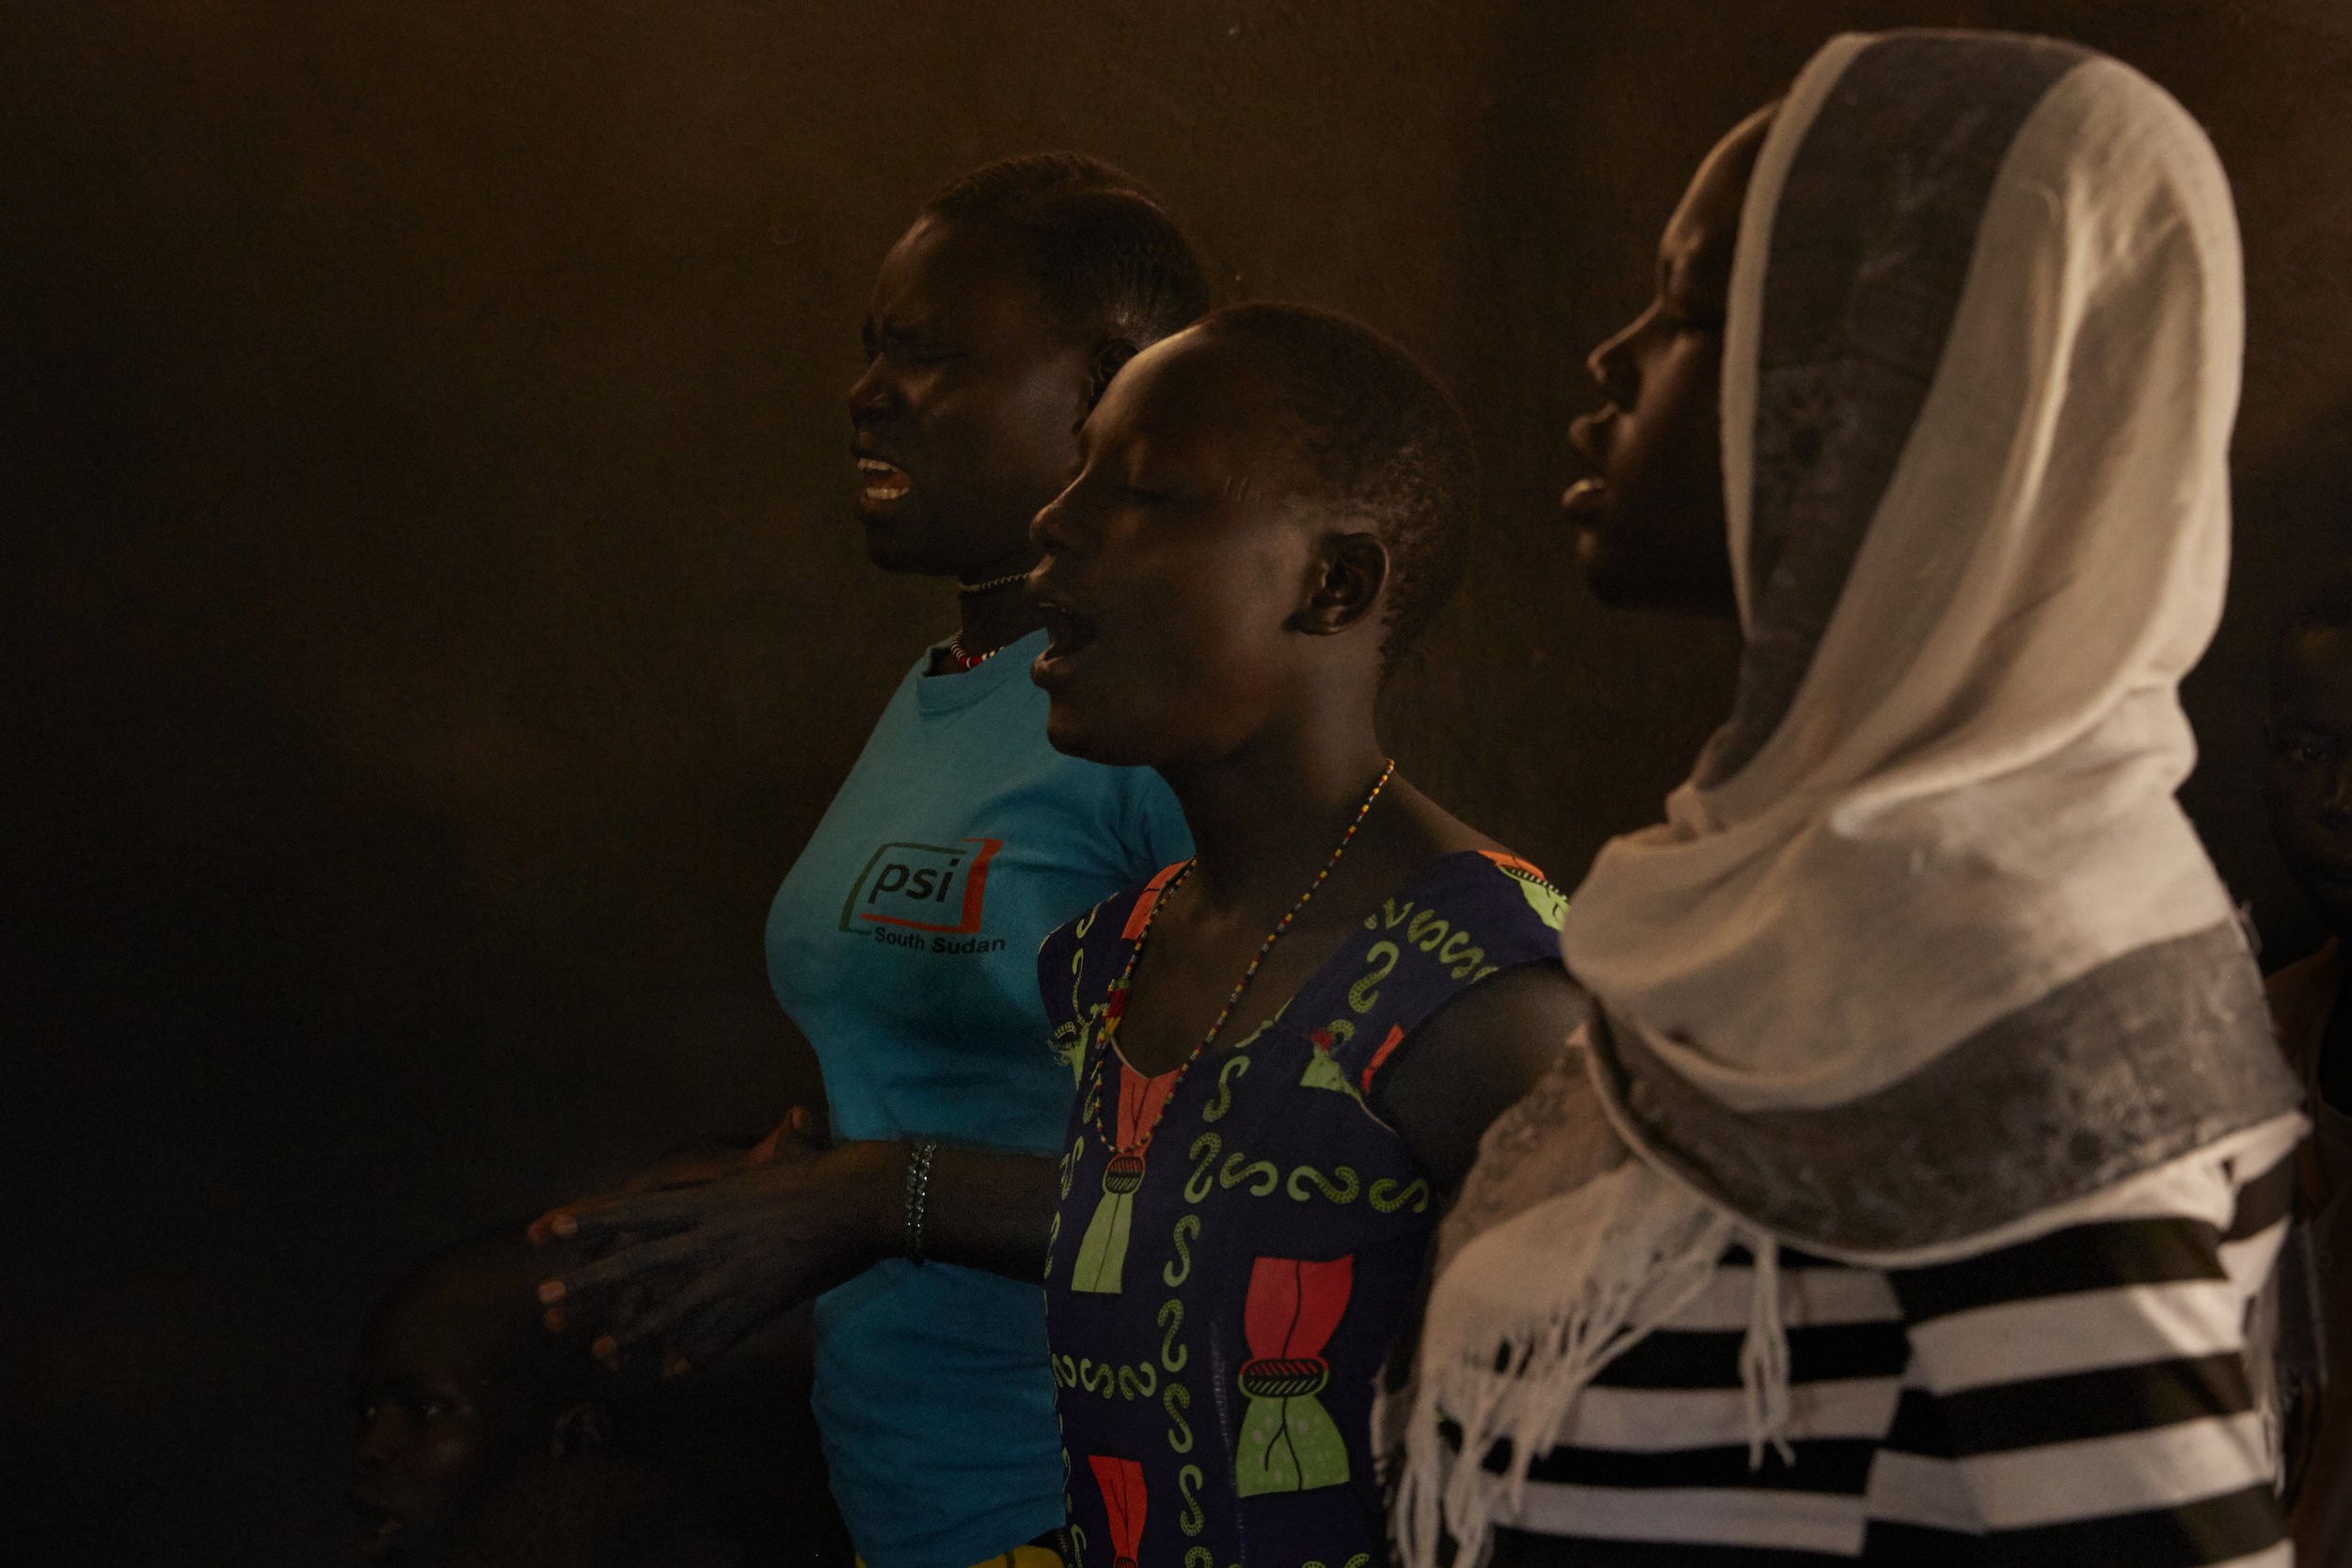 The wives and relatives of soldiers sing hymns in a church in Yei, South Sudan